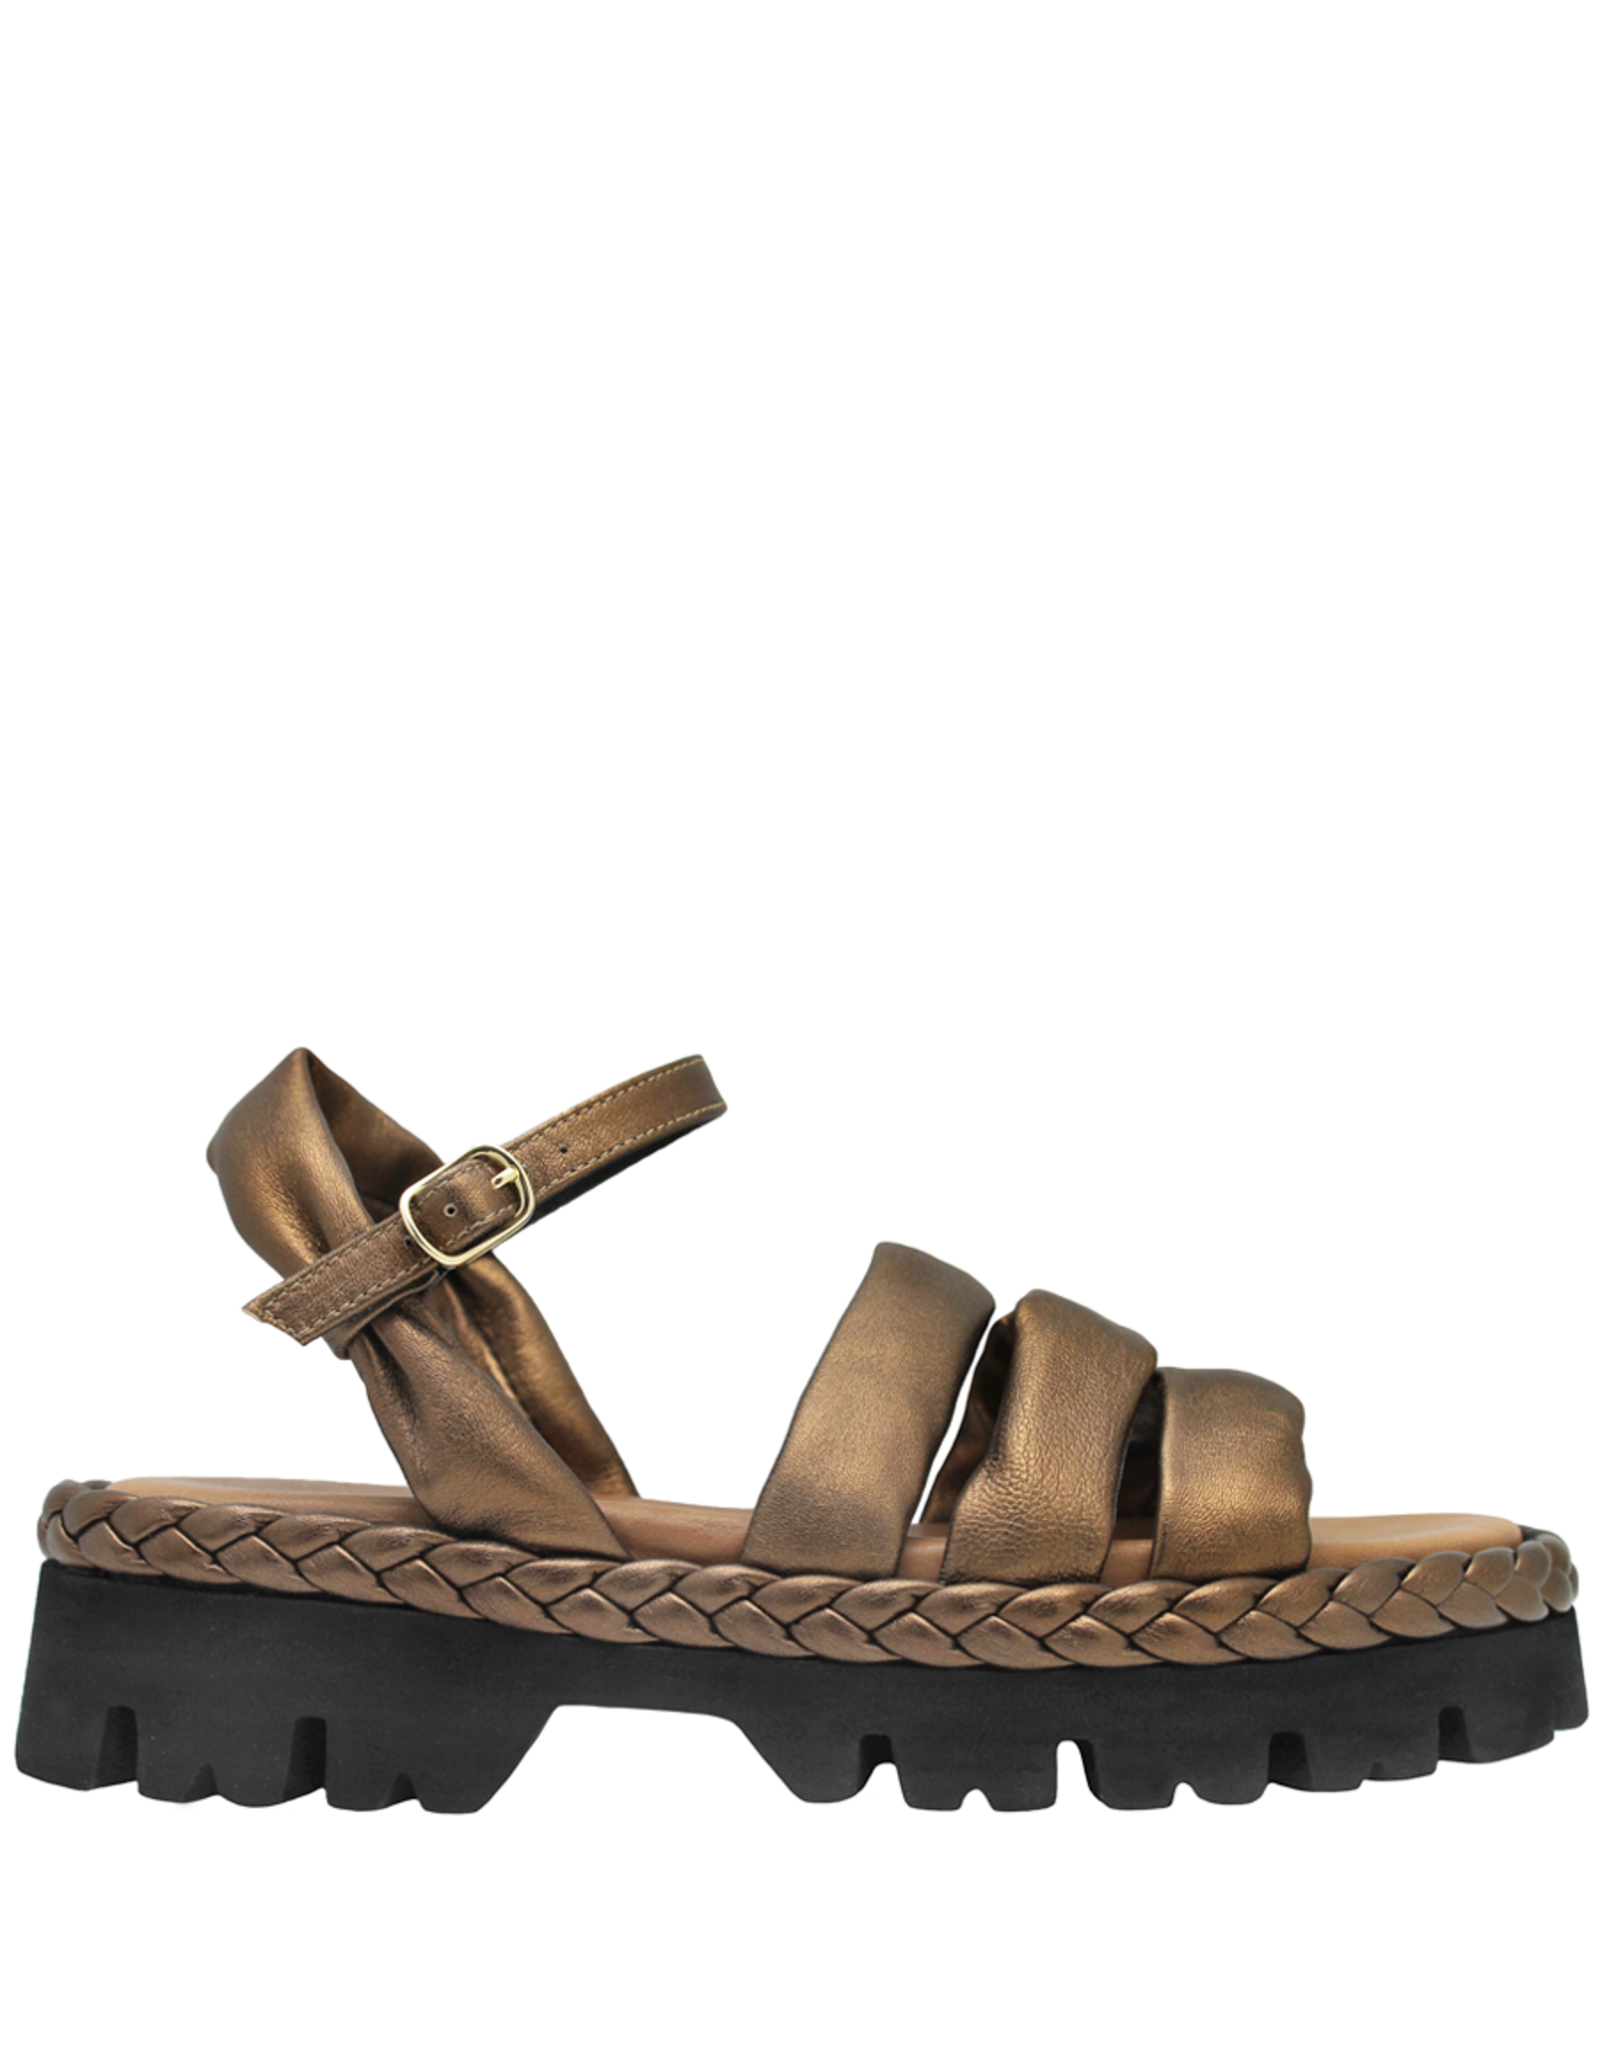 Now Now Bronze 3-Band Sandal with Tread 7445